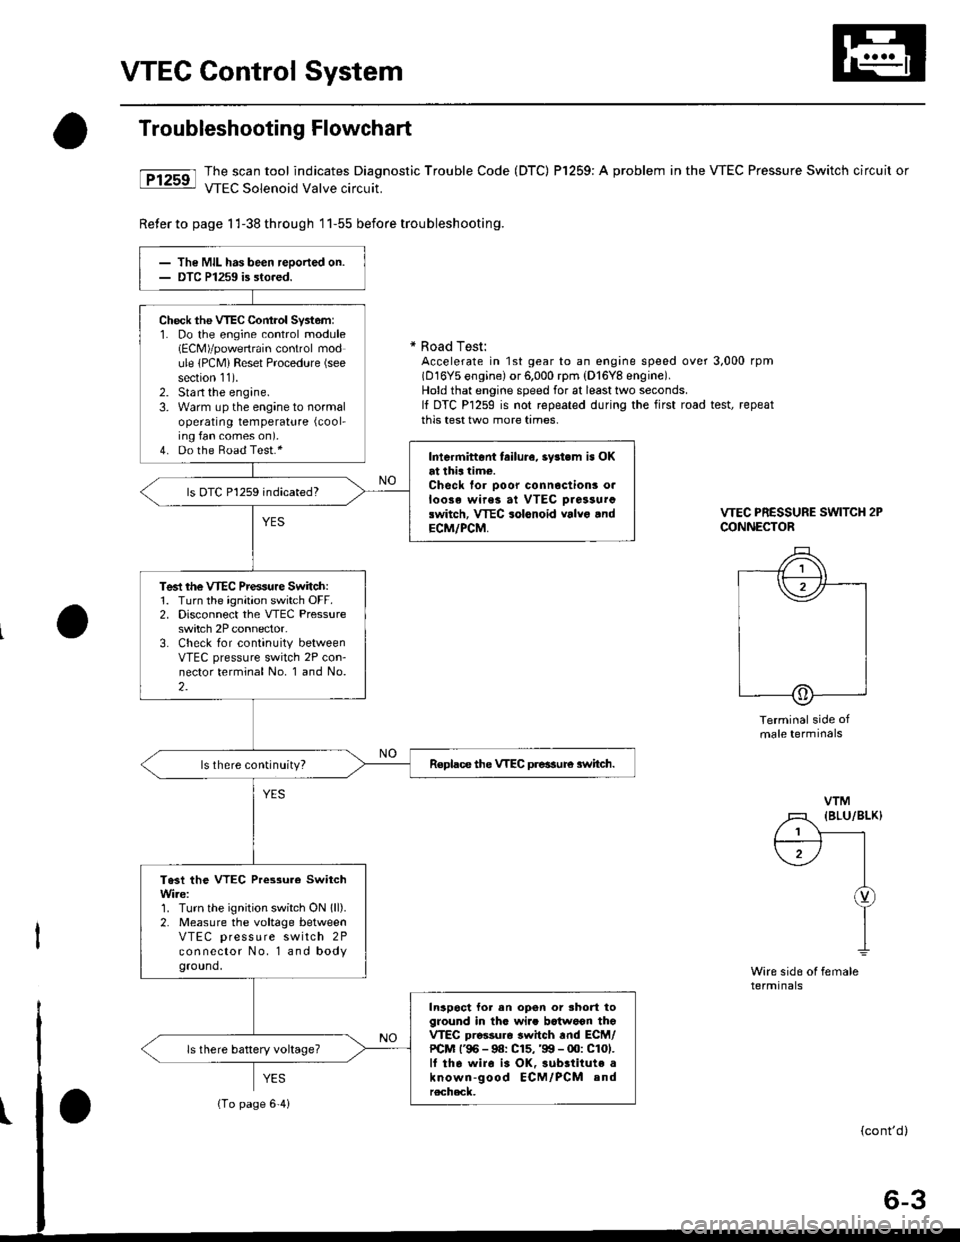 HONDA CIVIC 2000 6.G Owners Manual VTEC Control System
Troubleshooting Flowchart
tFtrsrl #ilH:::lj1t:"J:T,?ffnostic 
rrouble code (Drc) Pr25e: A probrem in the vrEc Pressure switch circuit or
Reter to page 1 l-38 th roug h 1 1-55 befor